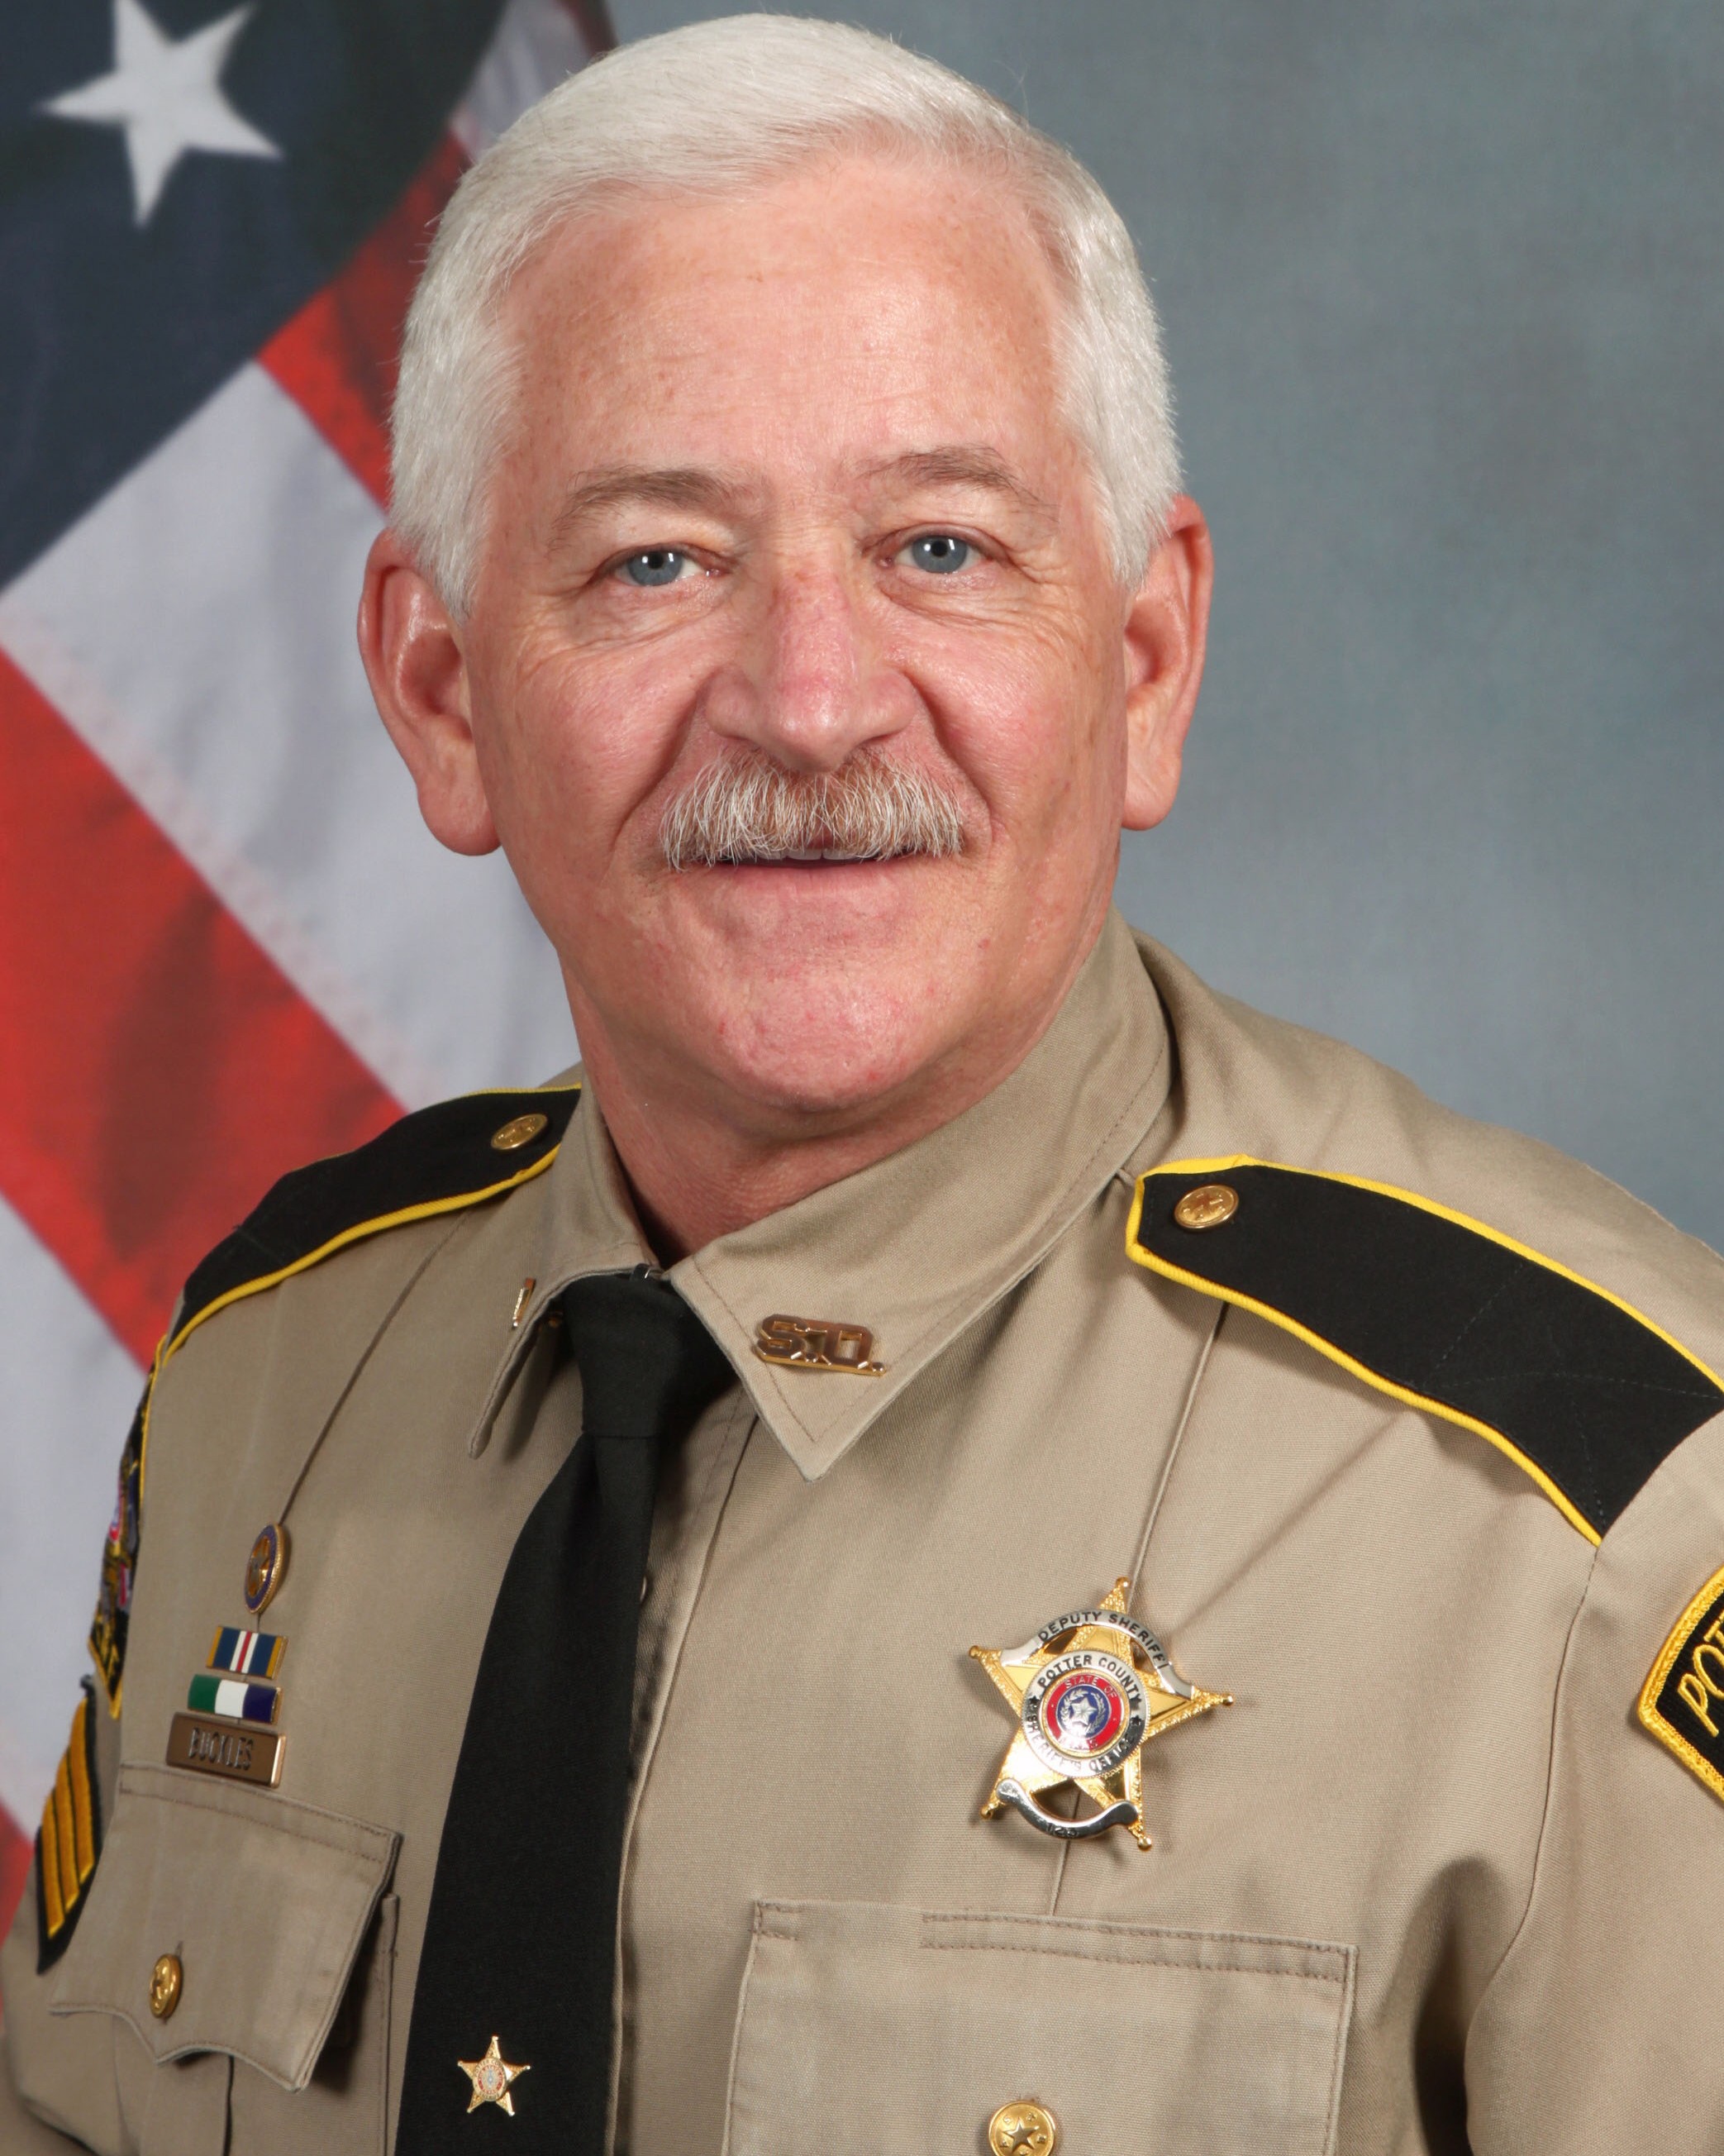 Sergeant Paul Aaron Buckles | Potter County Sheriff's Office, Texas